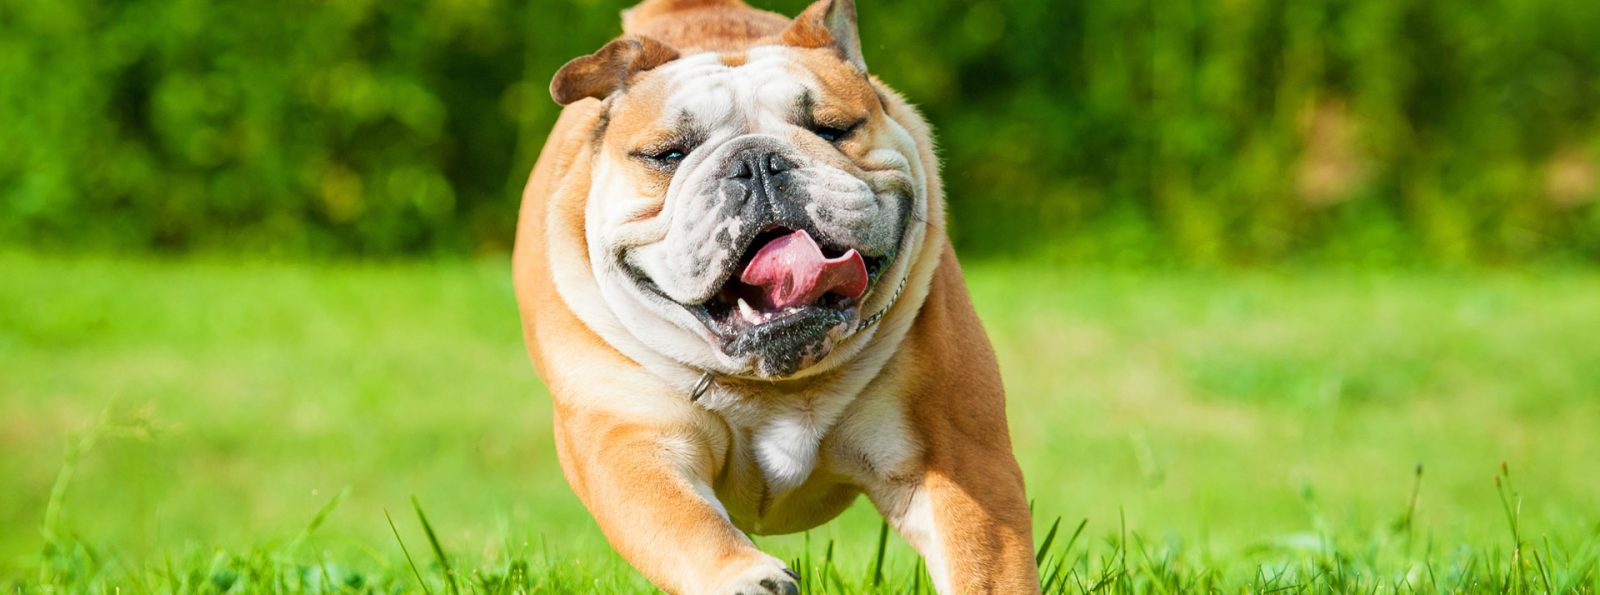 Bulldogs Are Beautiful Day: Health Concerns All Bull Dog Owners Should Know About